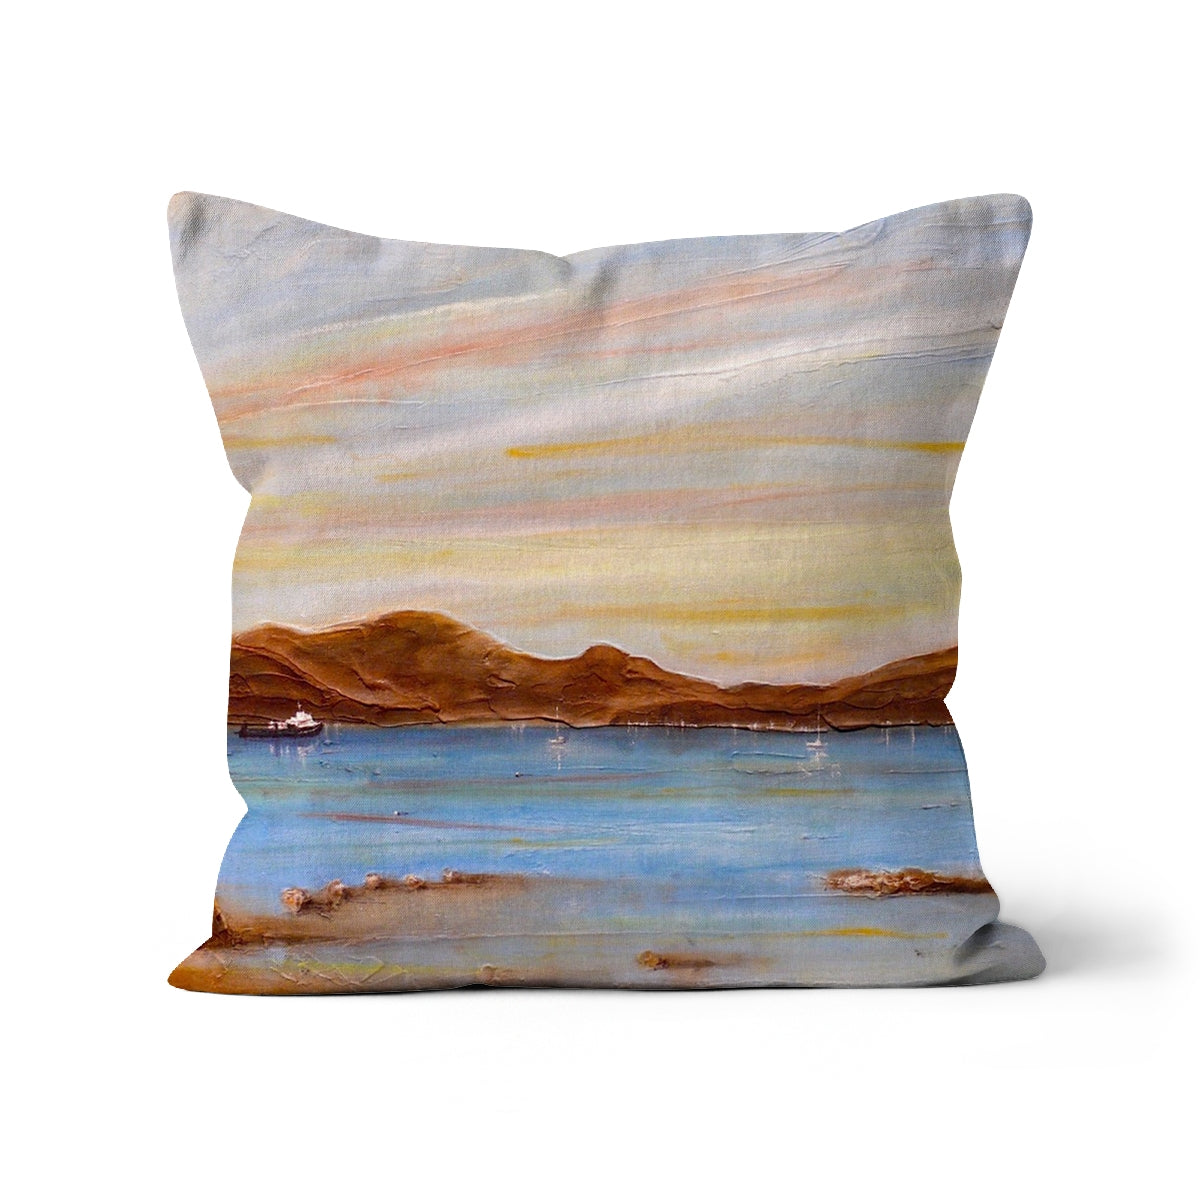 The Last Ferry To Dunoon Art Gifts Cushion-Cushions-River Clyde Art Gallery-Linen-24"x24"-Paintings, Prints, Homeware, Art Gifts From Scotland By Scottish Artist Kevin Hunter